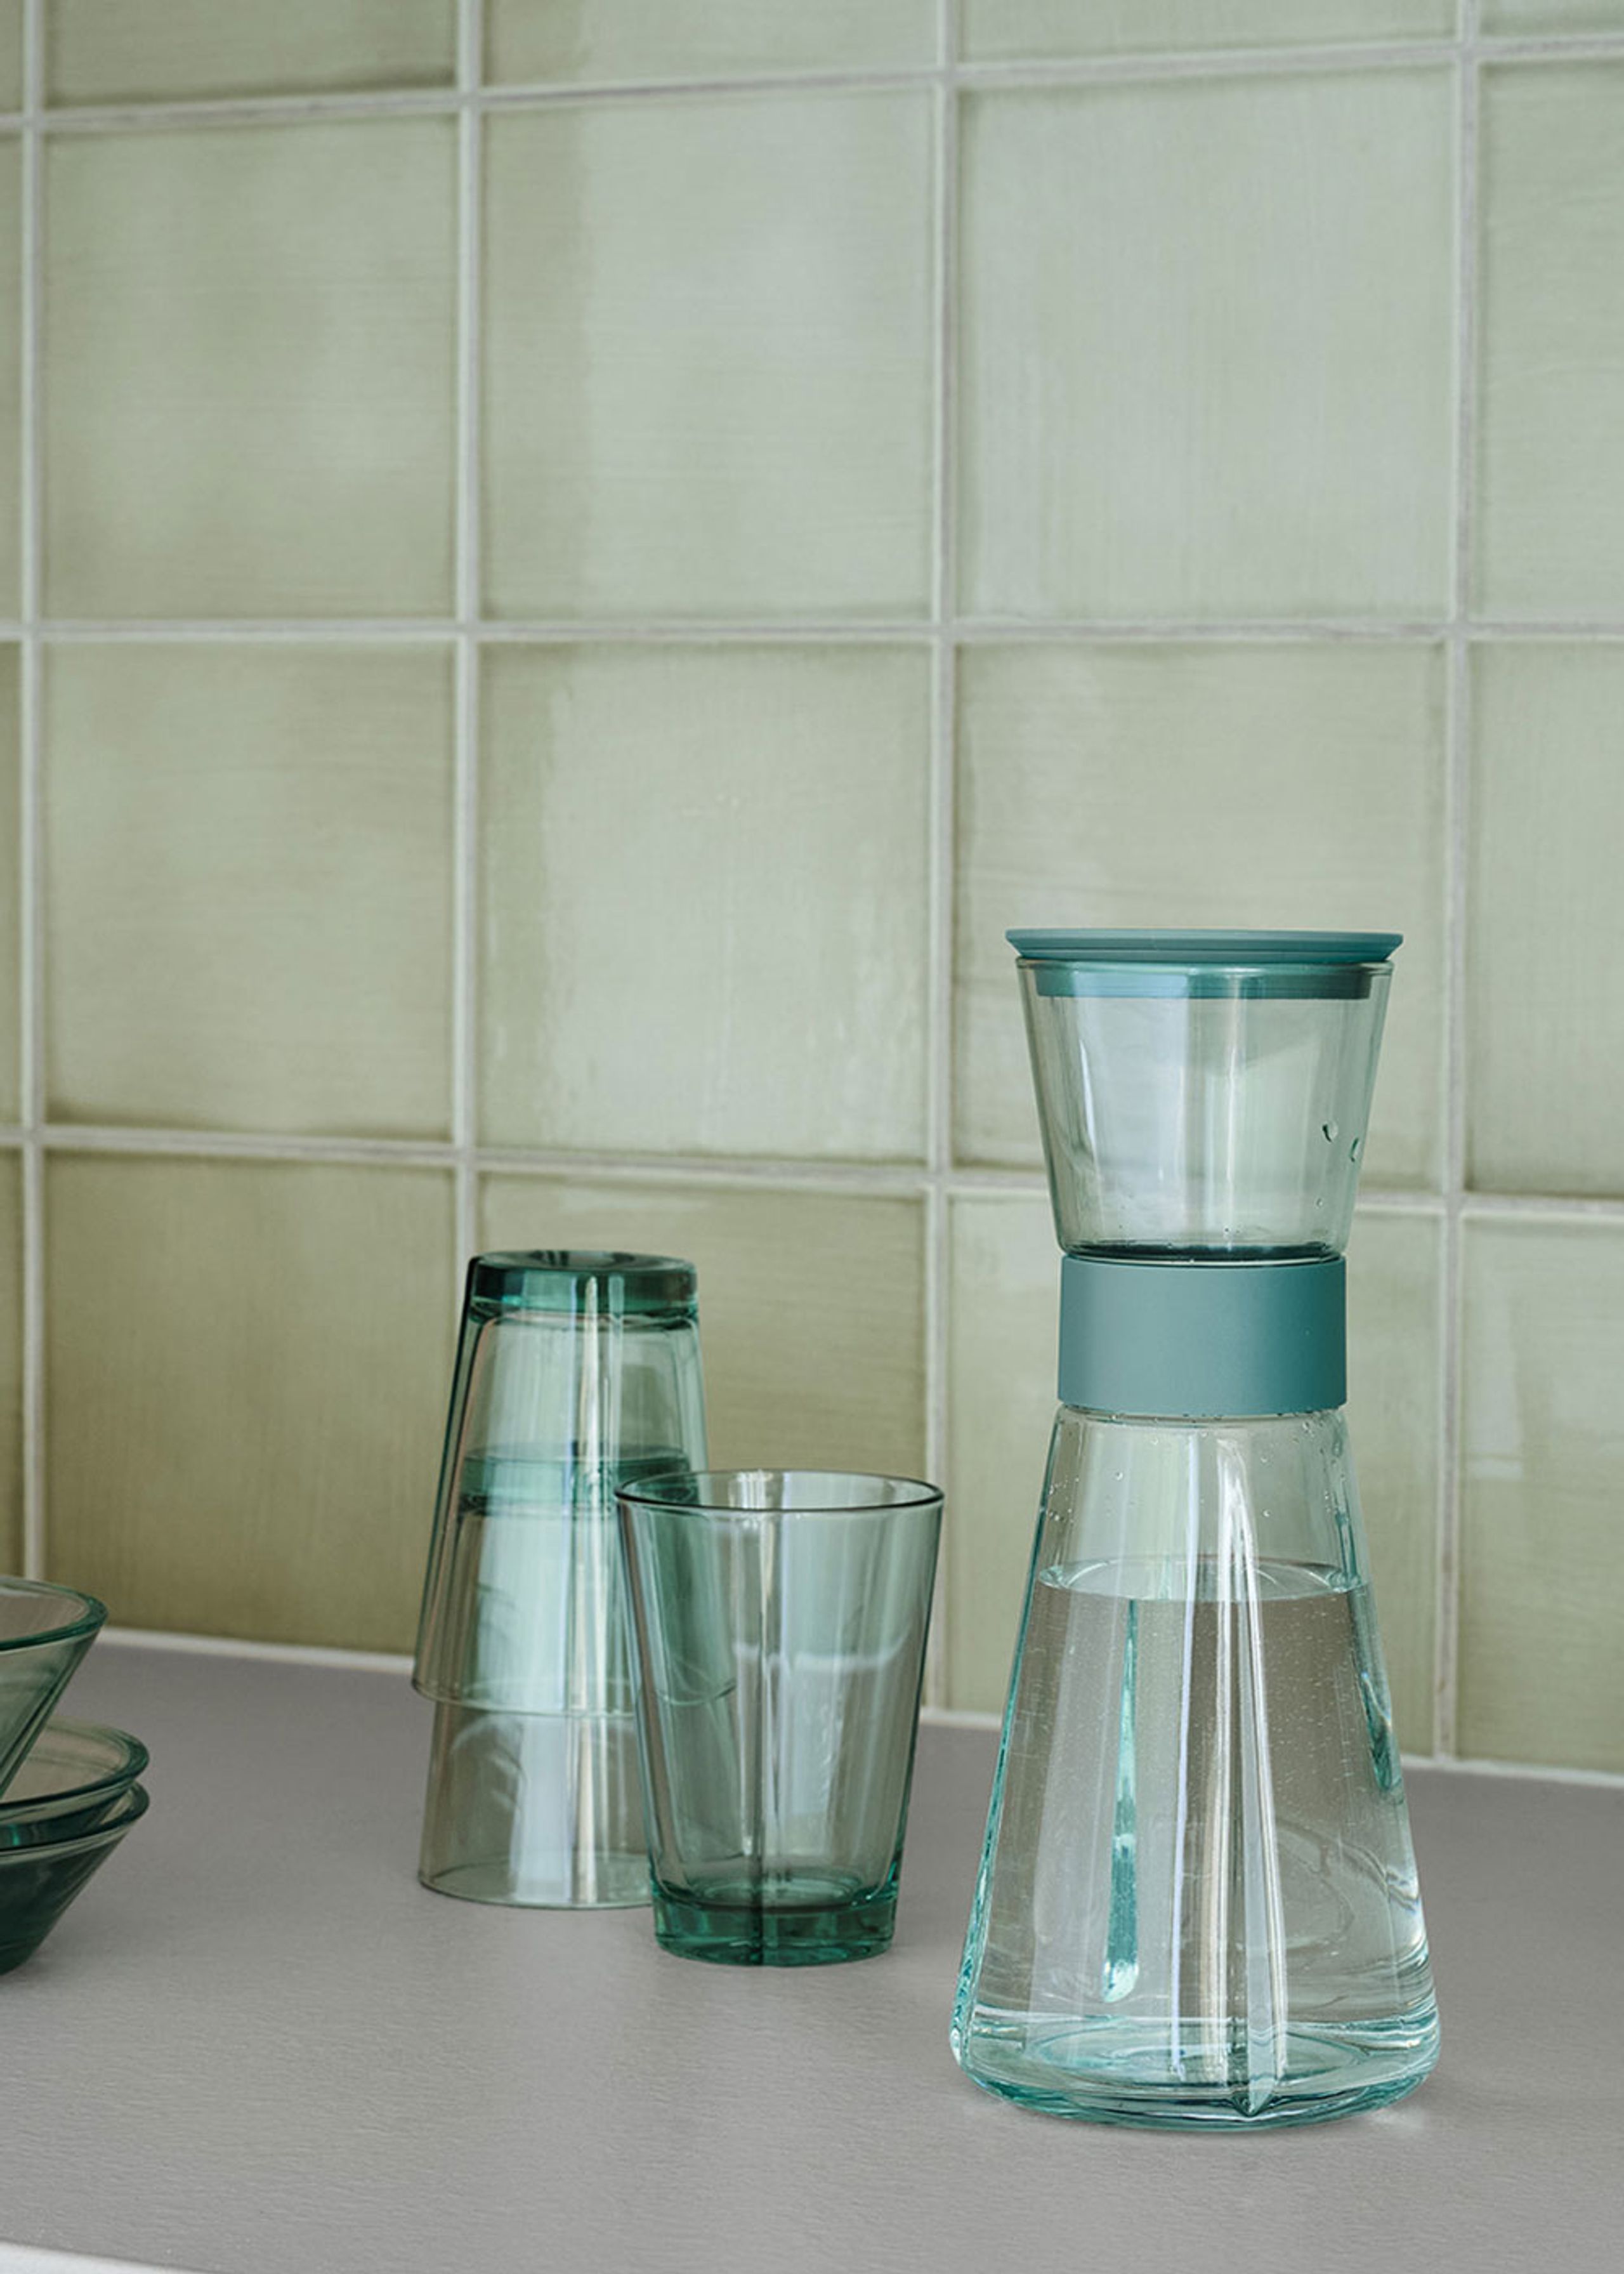 https://images.byflou.com/13/3/images/products/0/0/rosendahl-vandkande-rosendahl-grand-cru-recycled-water-carafe-clear-green-4421969.jpeg